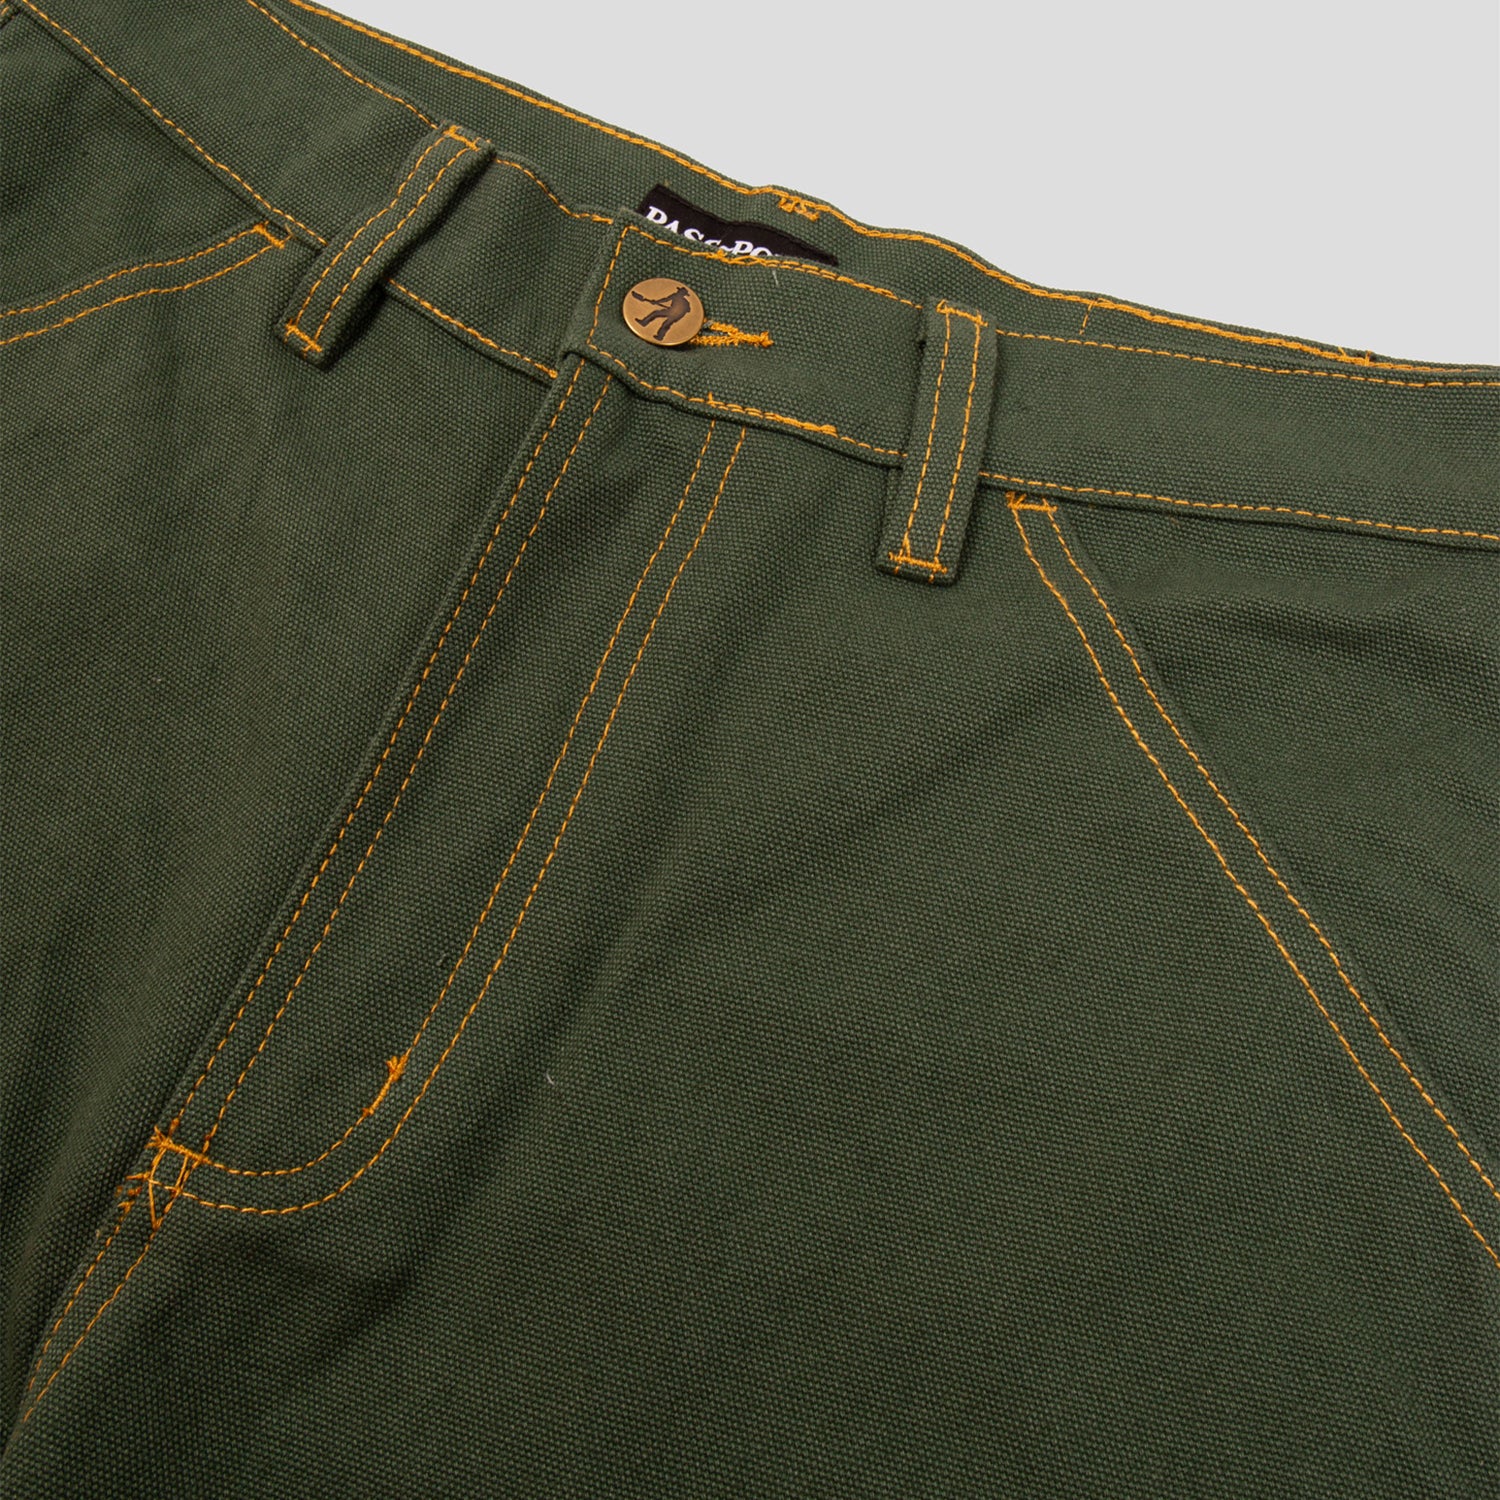 PASS~PORT "DIGGERS CLUB" PANT OLIVE